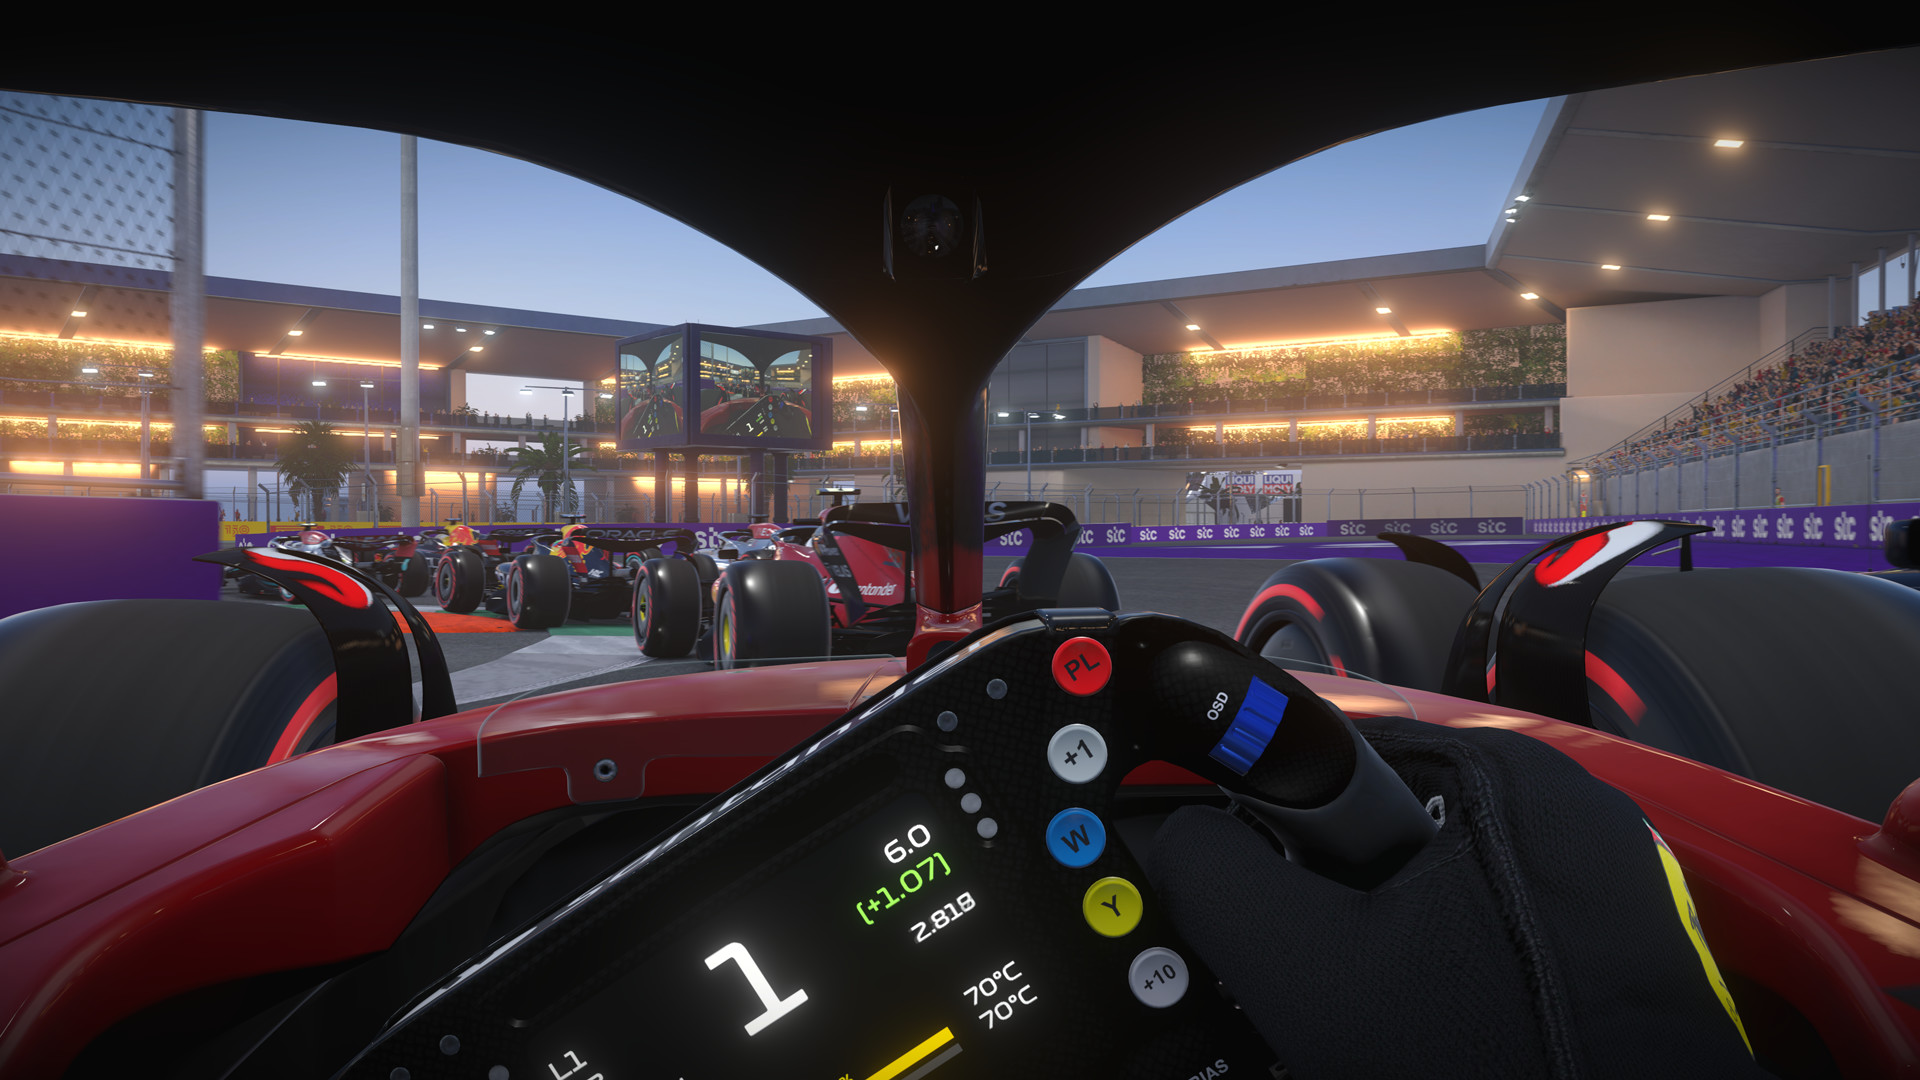 F1 22 PC performance report - Graphics card benchmarks